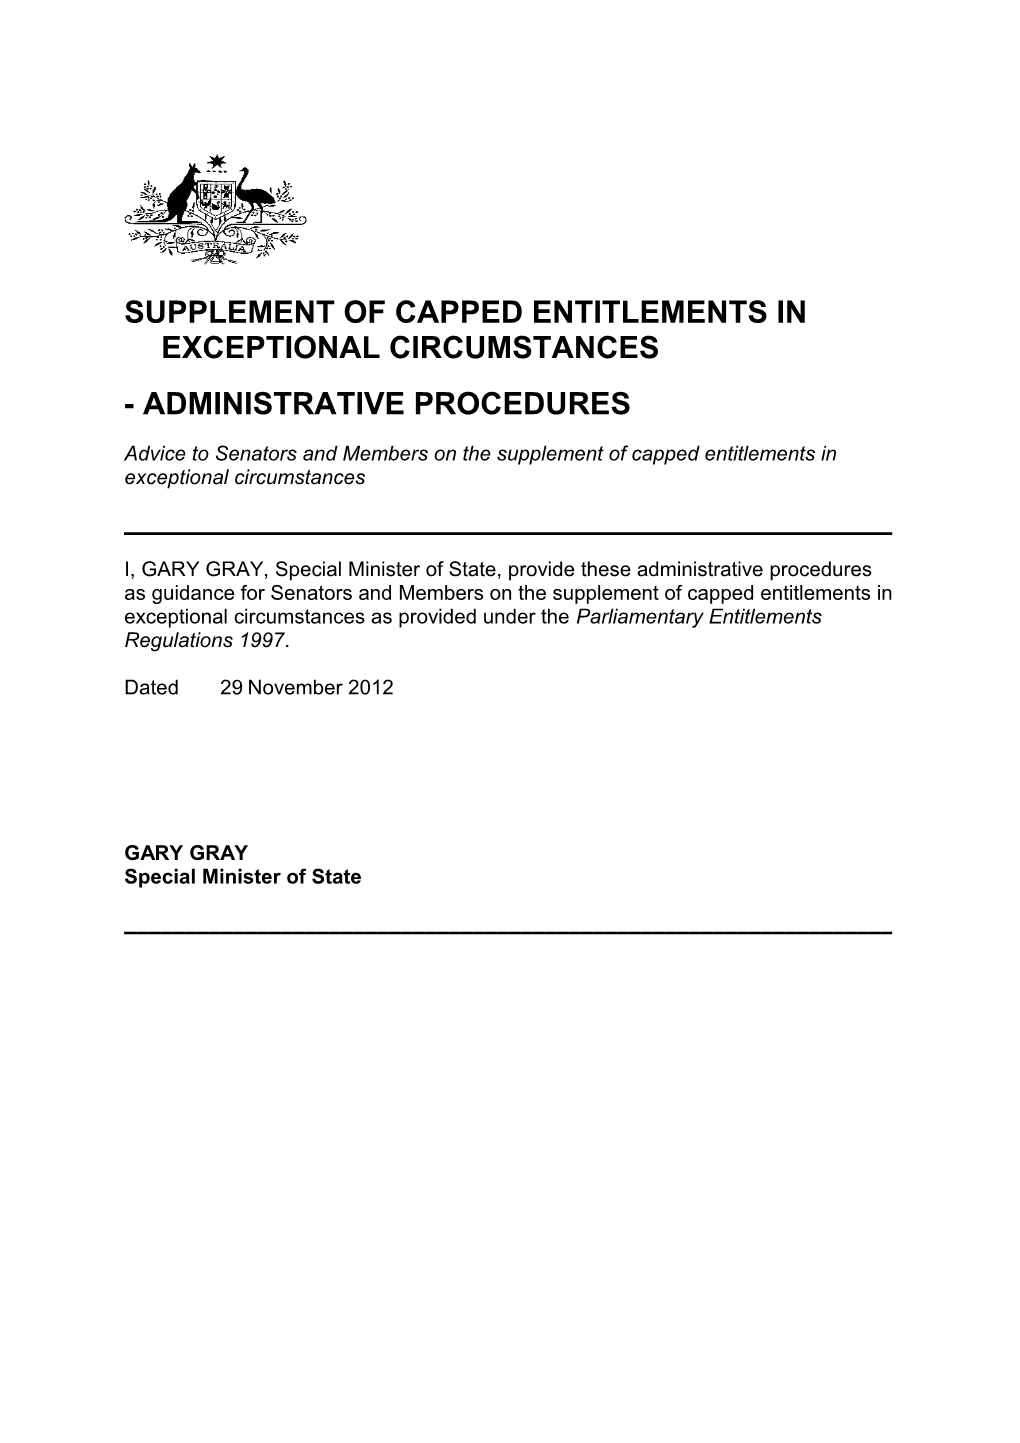 Supplement of Capped Entitlements in Exceptional Circumstances Administrative Procedures